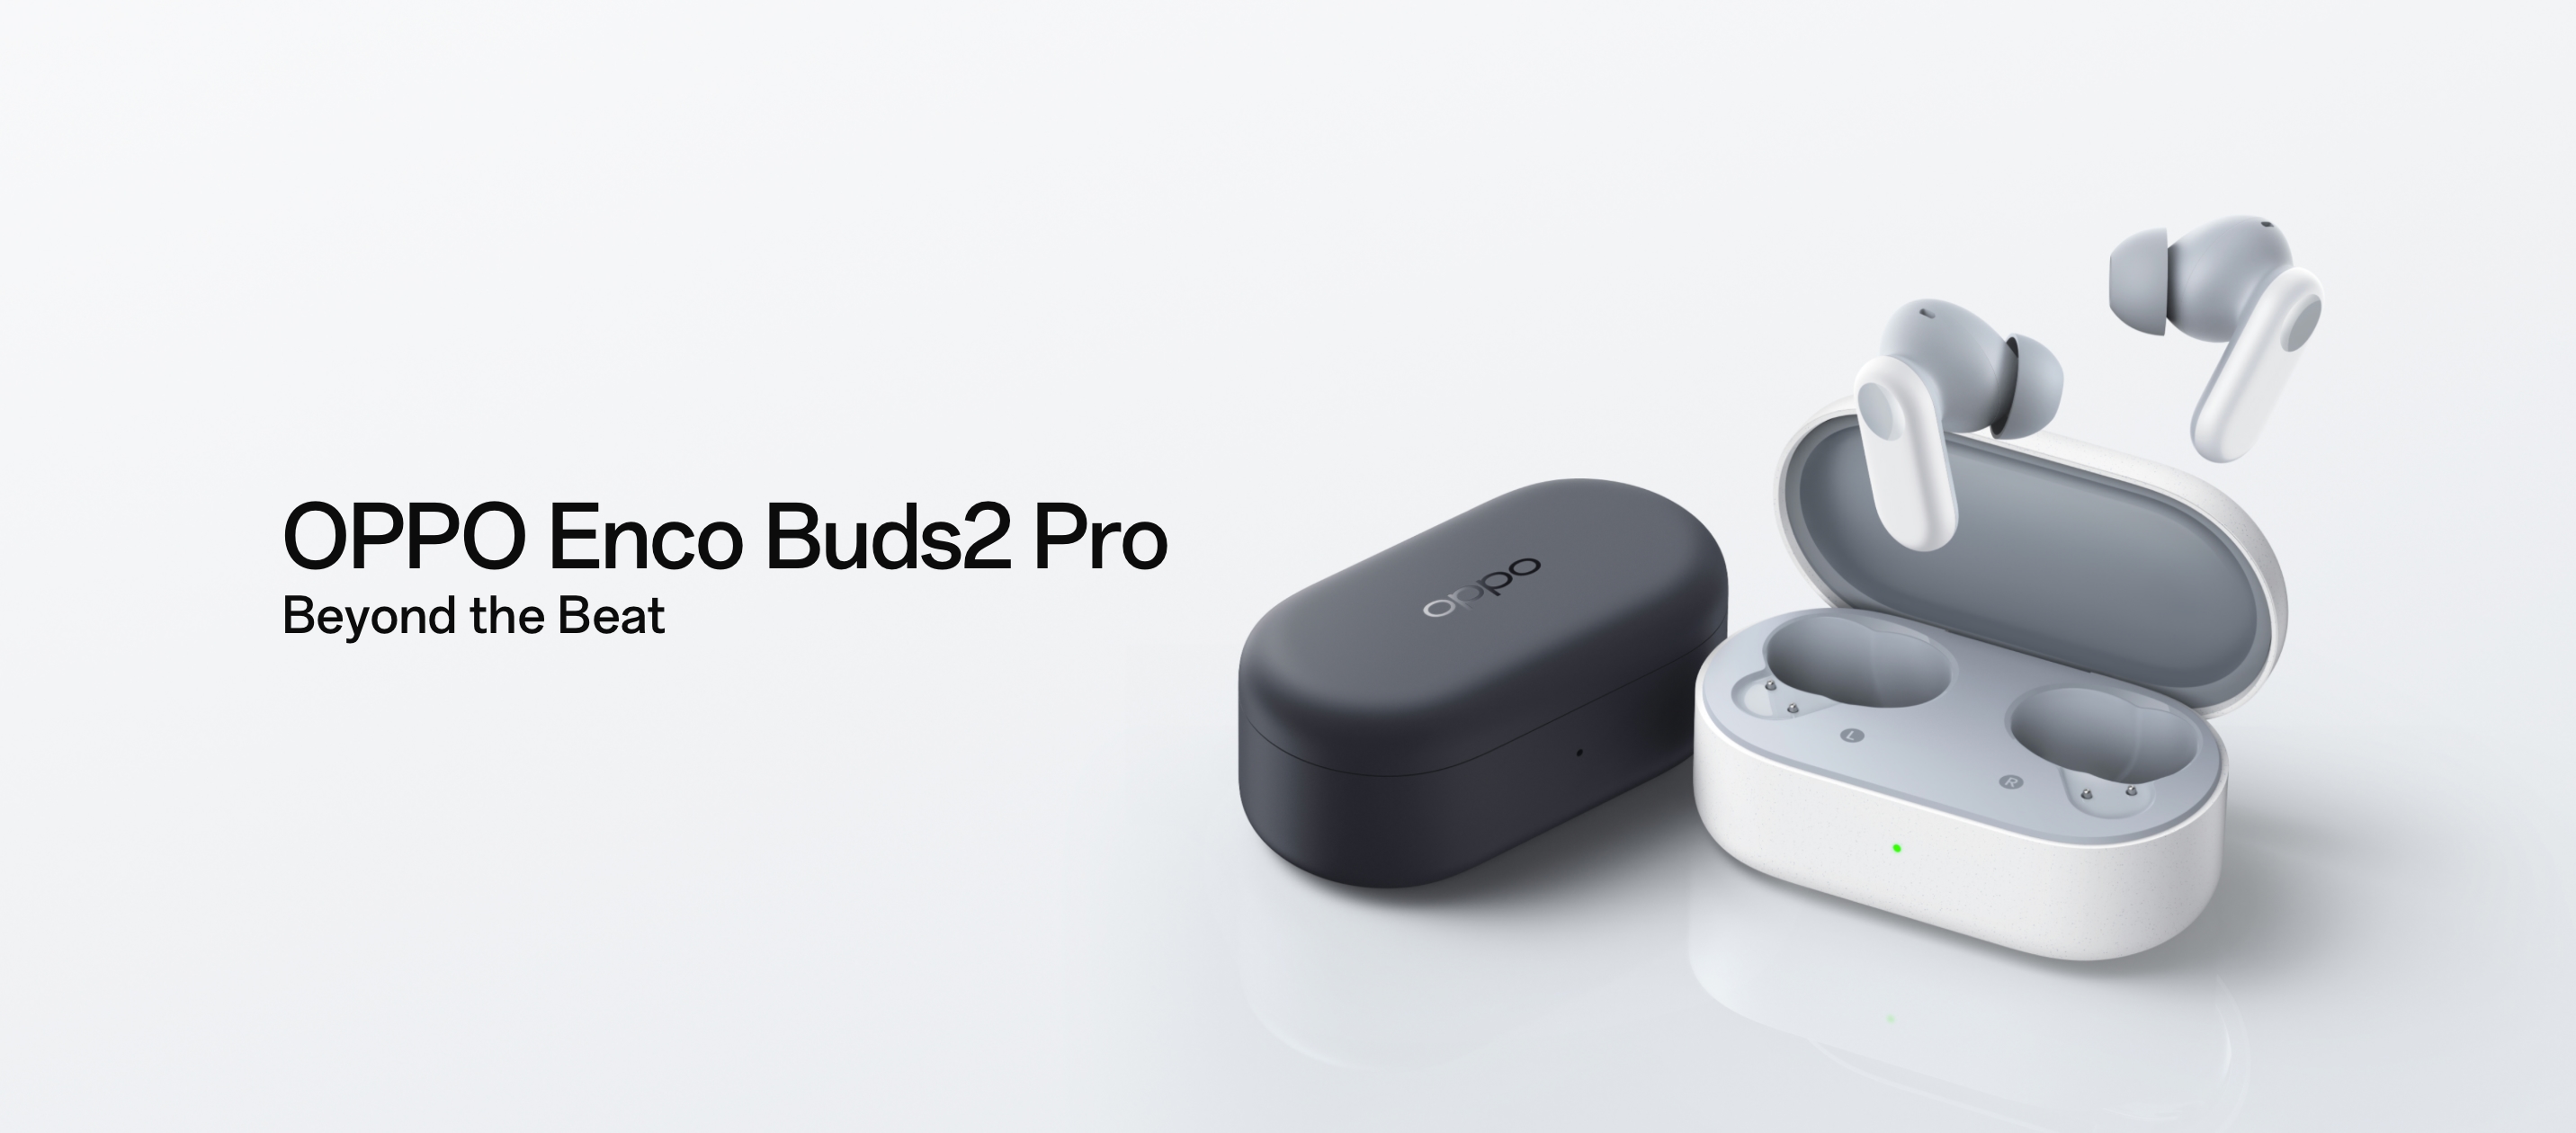 OPPO Enco Buds 2 Pro: TWS earphones with IP55 protection, Dolby Atmos,  Bluetooth 5.3 and up to 38 hours of battery life for $36